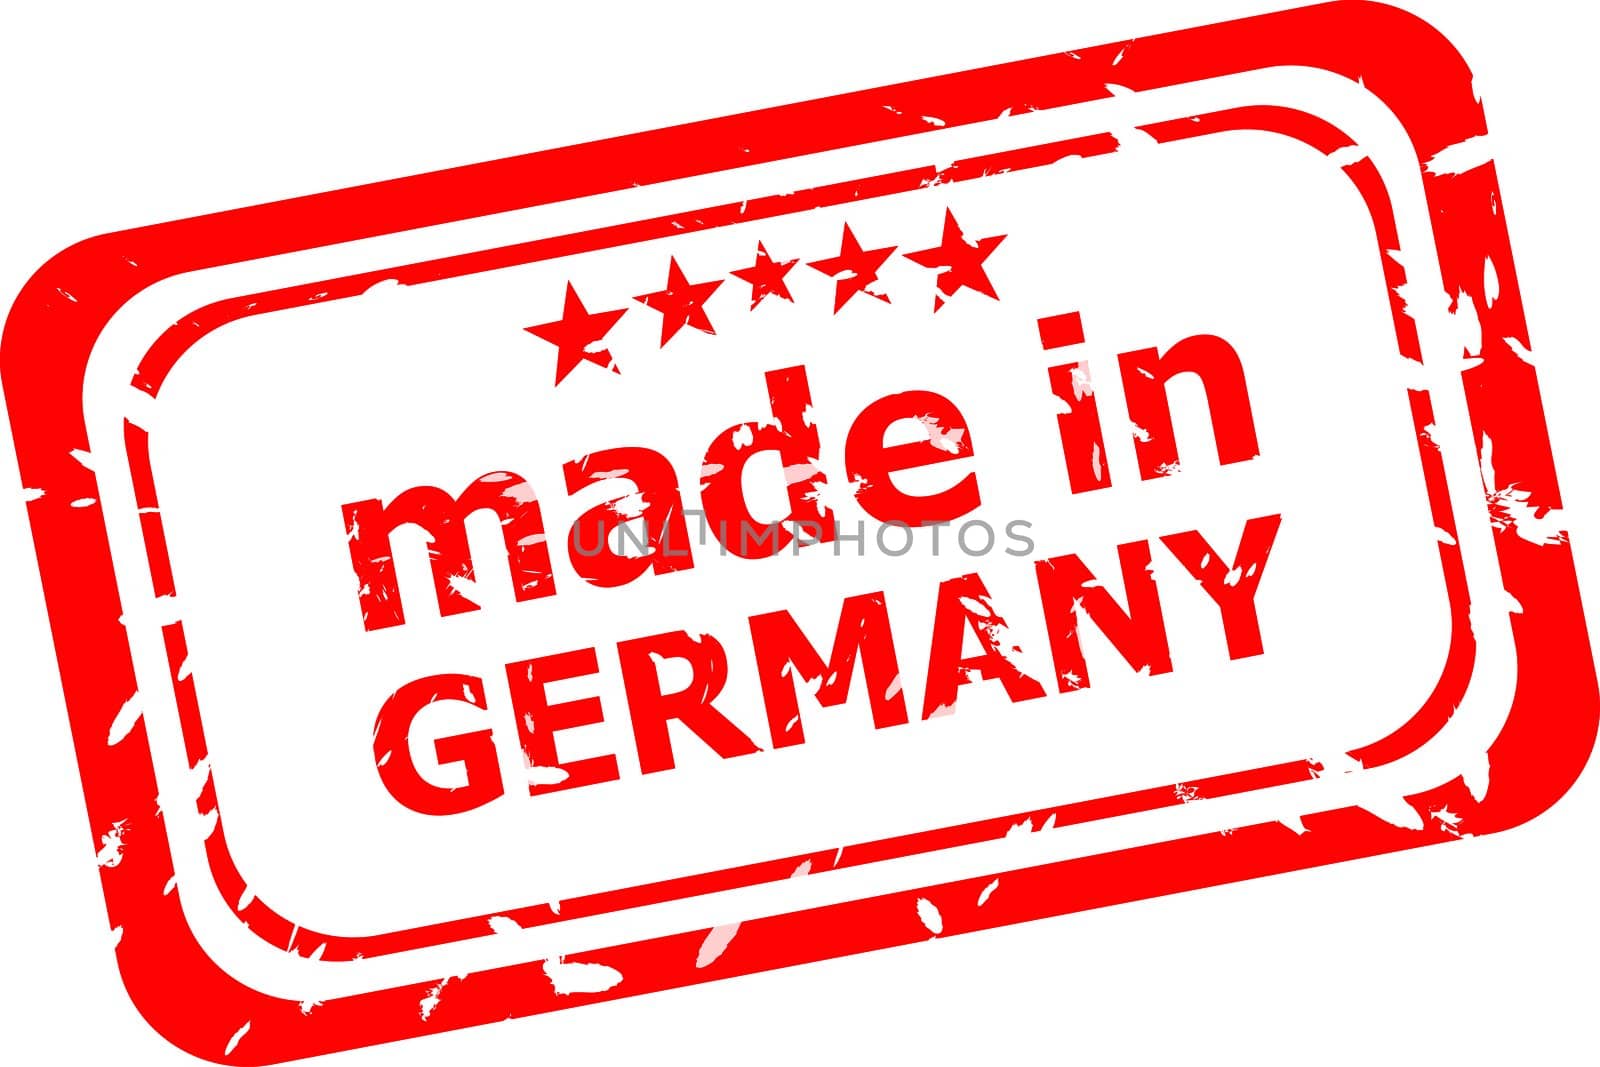 Red rubber stamp of Made In Germany